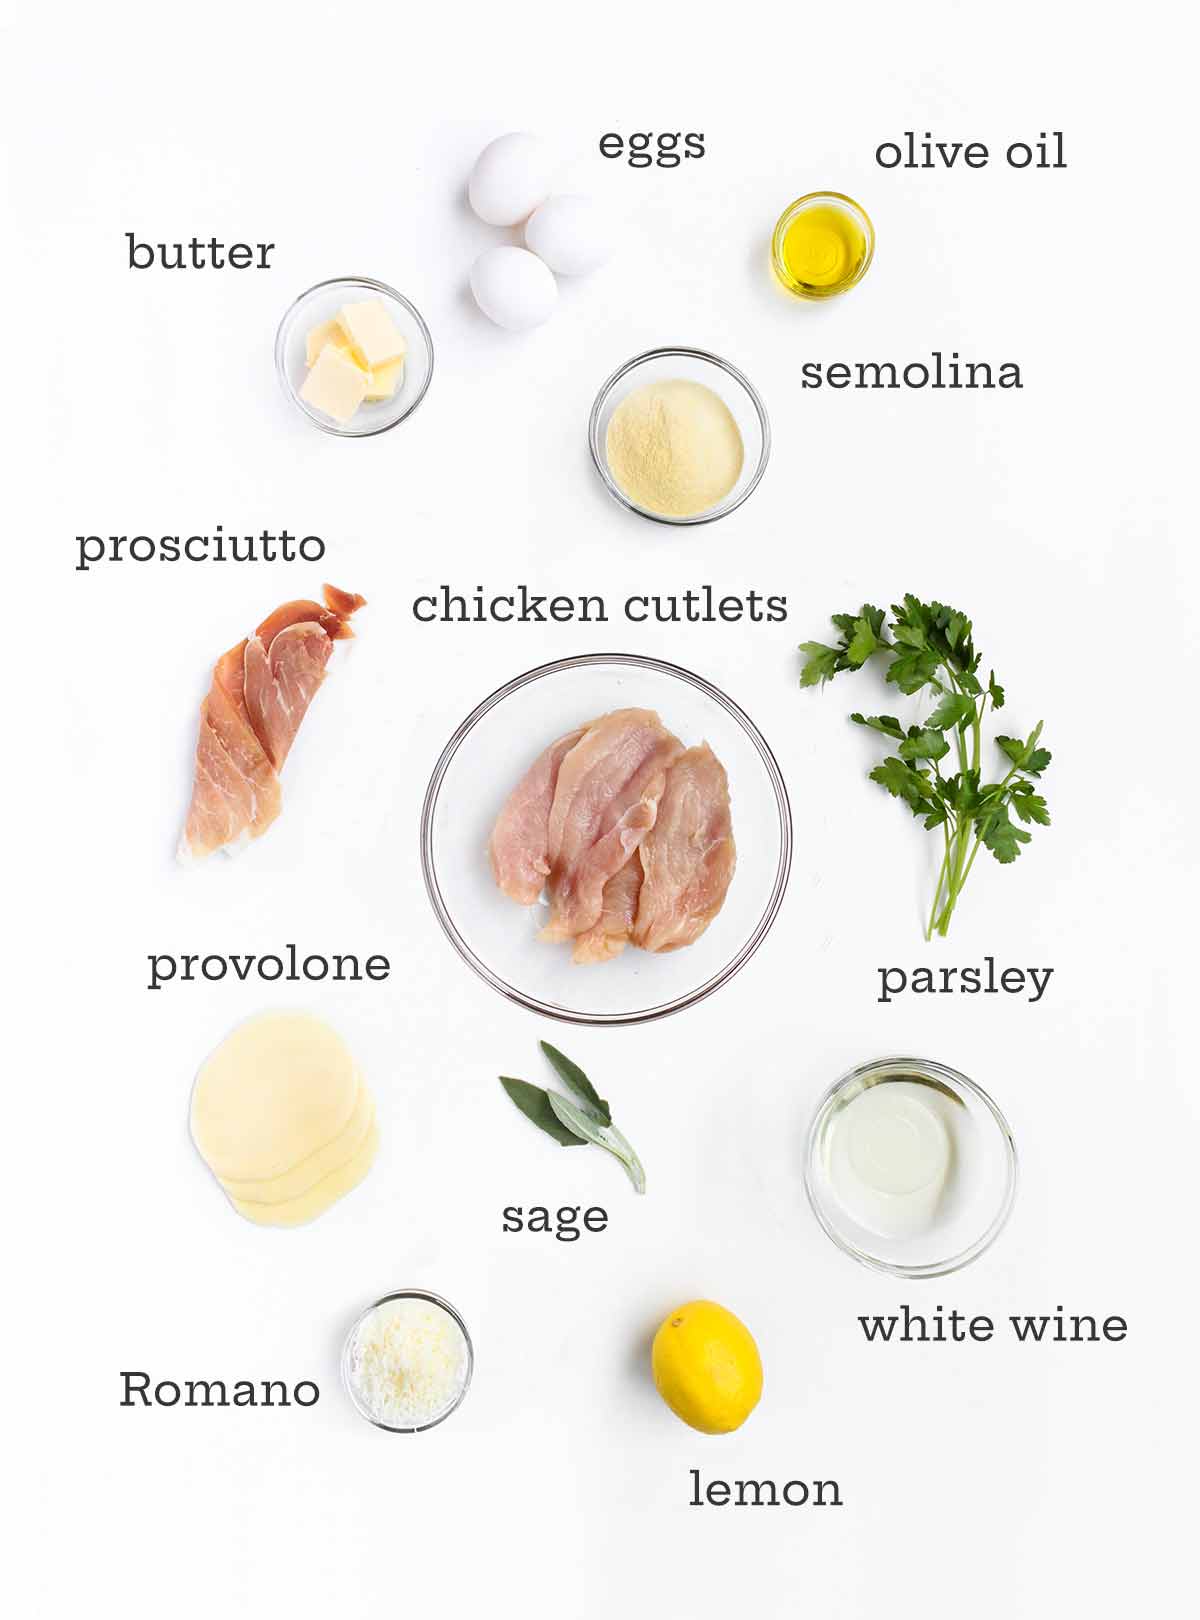 Ingredients for chicken saltimbocca--chicken, eggs, cheese, herbs, olive oil, wine, butter, and prosciutto.